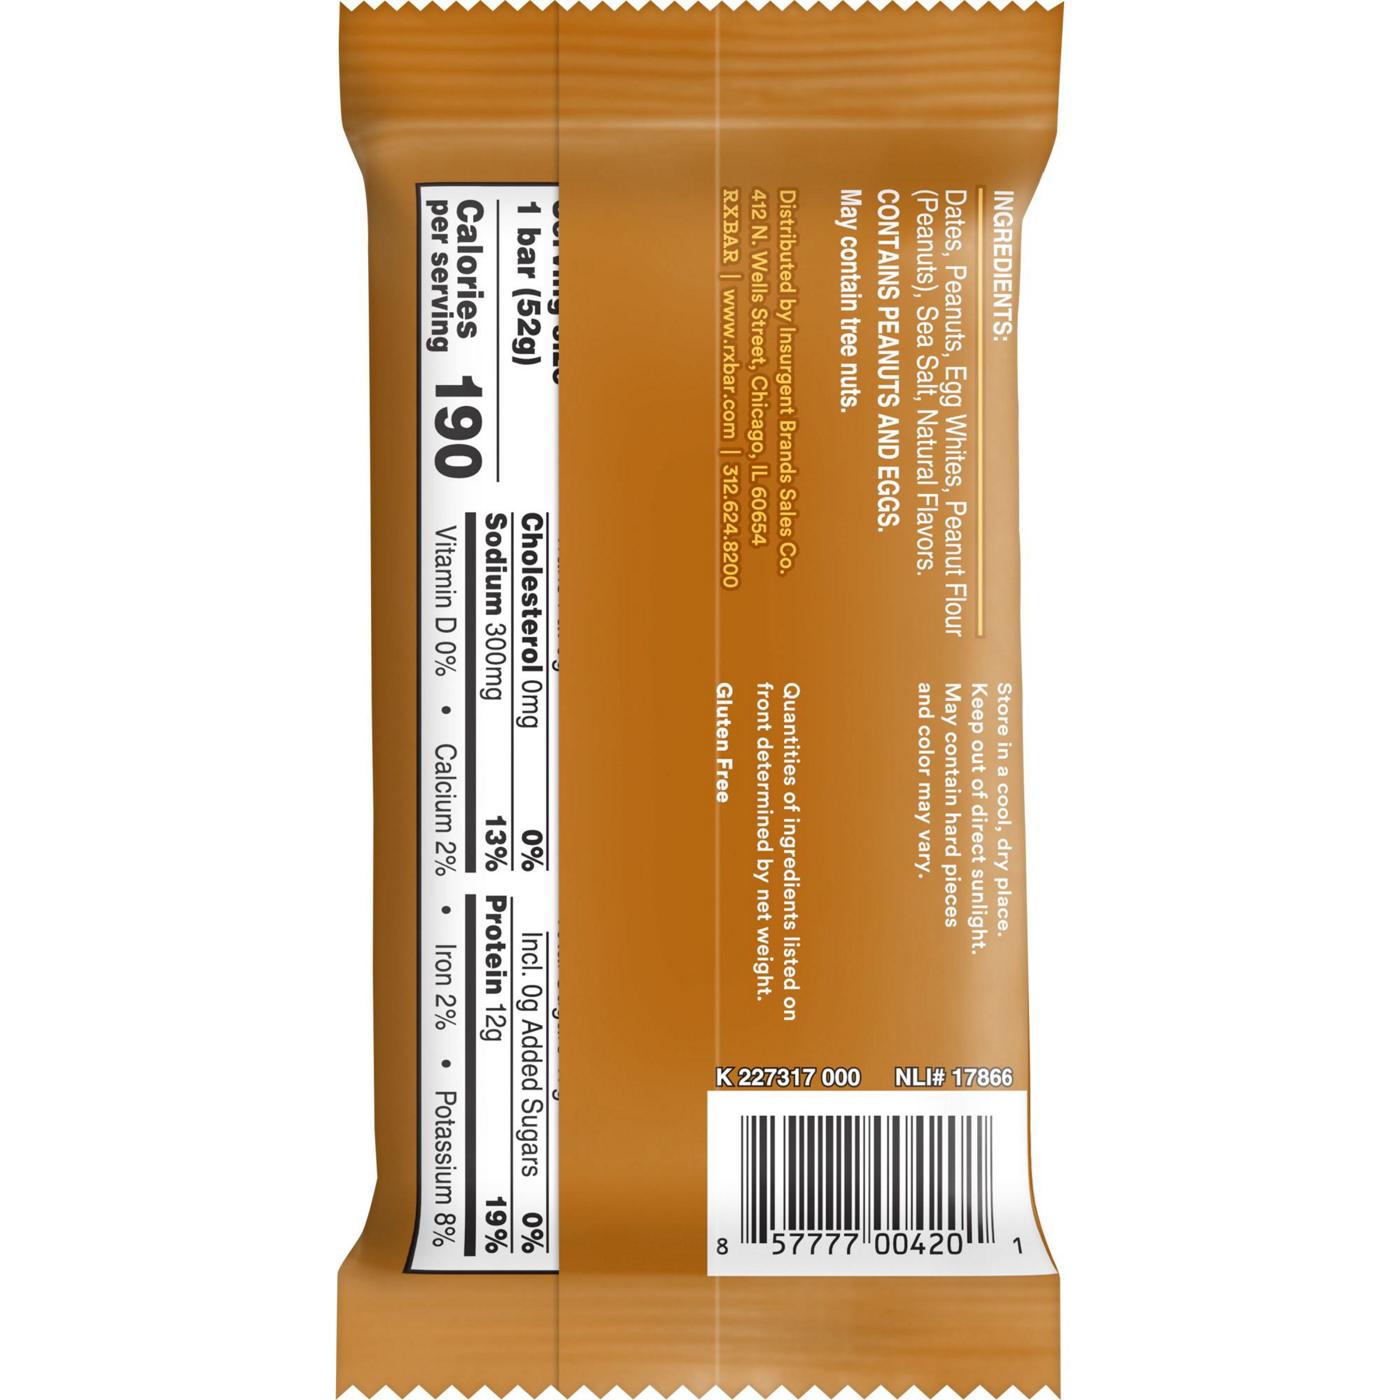 RXBAR Peanut Butter Protein Bars; image 2 of 3